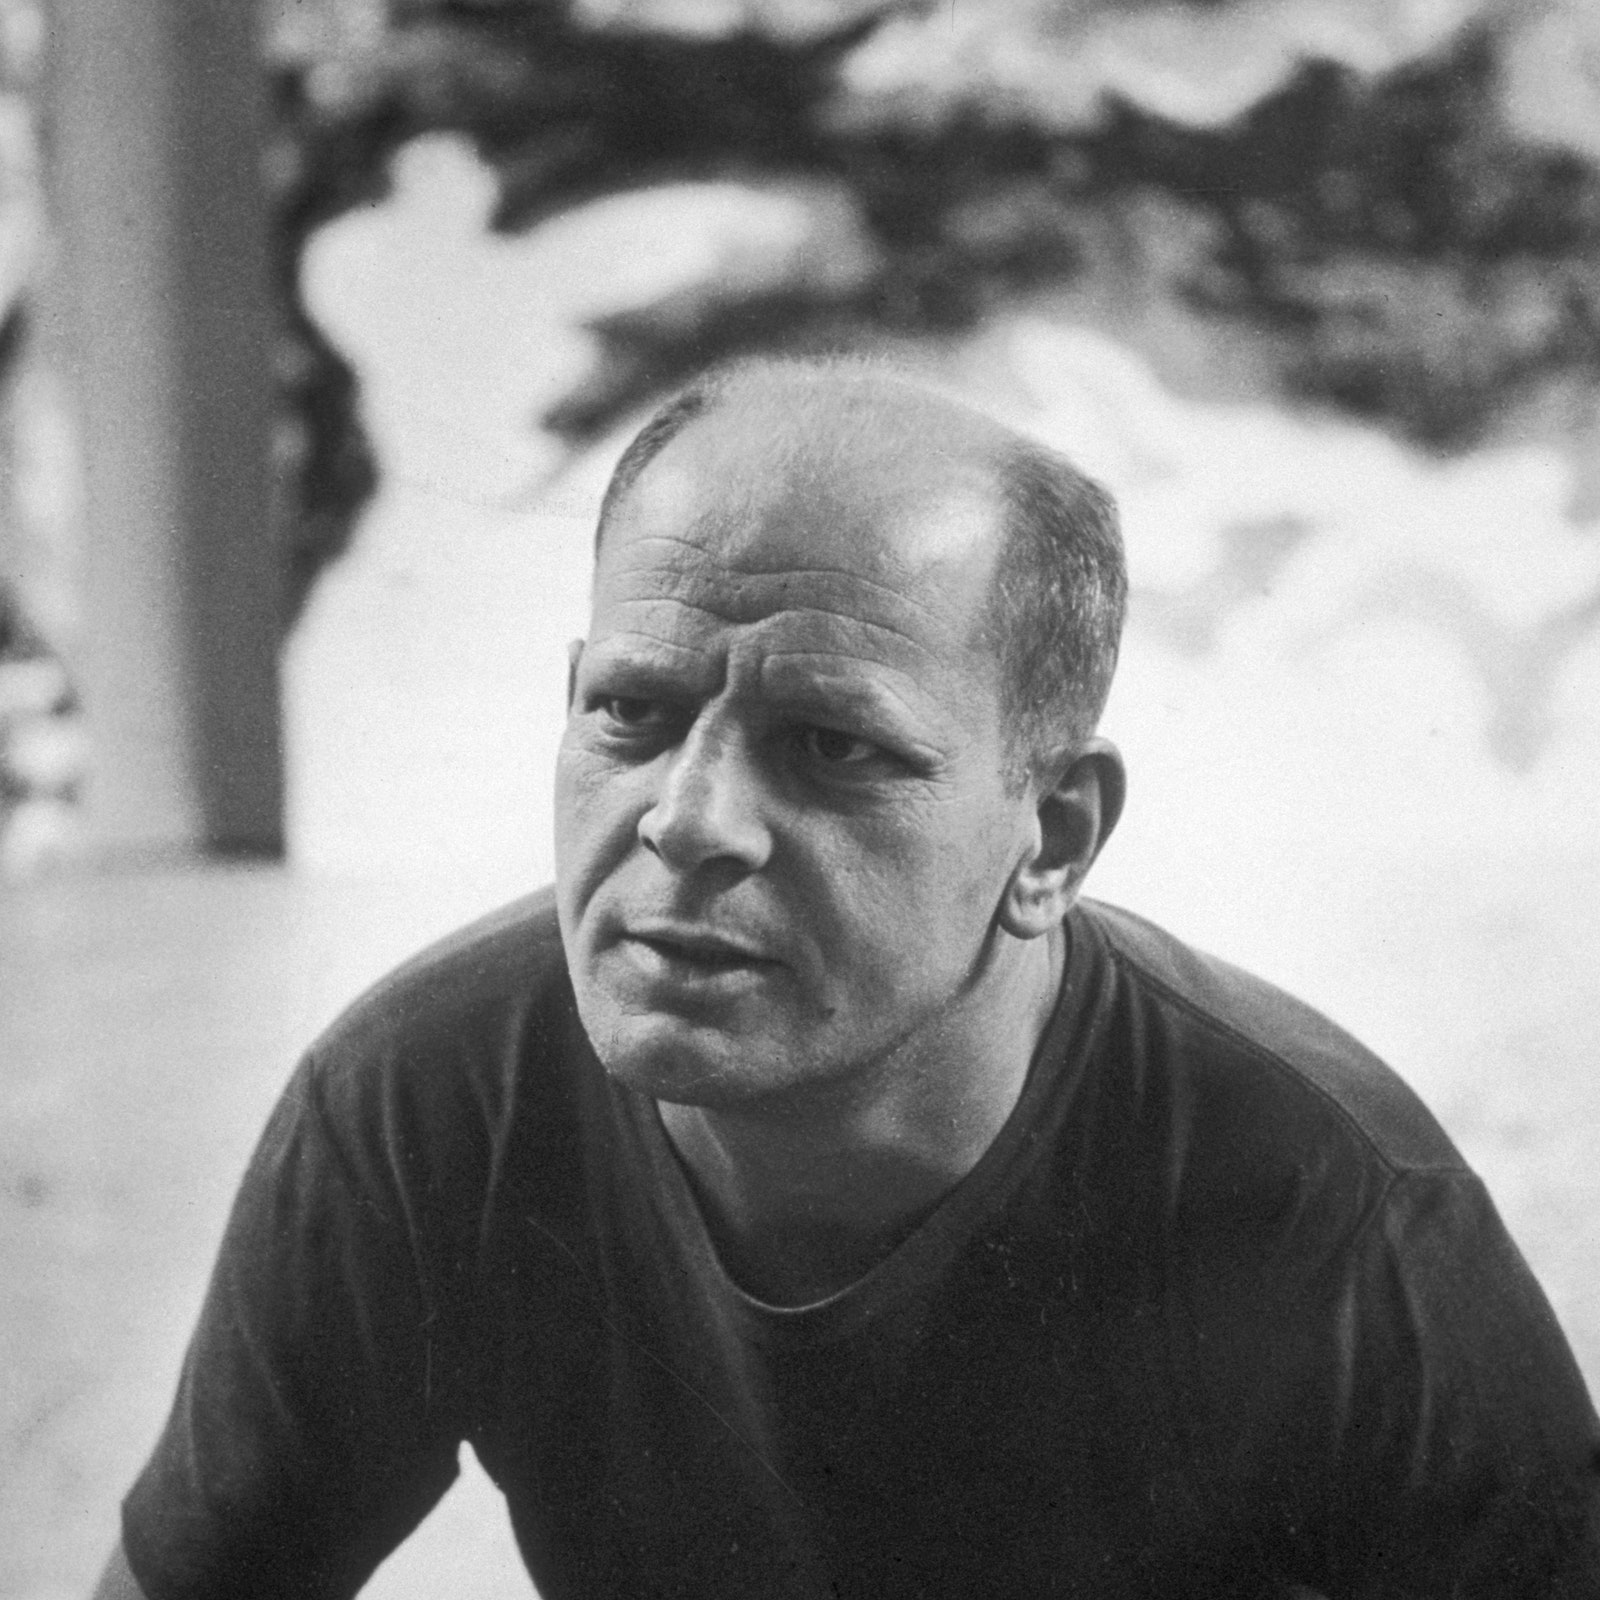 A Jackson Pollock Painting Worth $54 Million Was Just Discovered in a Police Raid